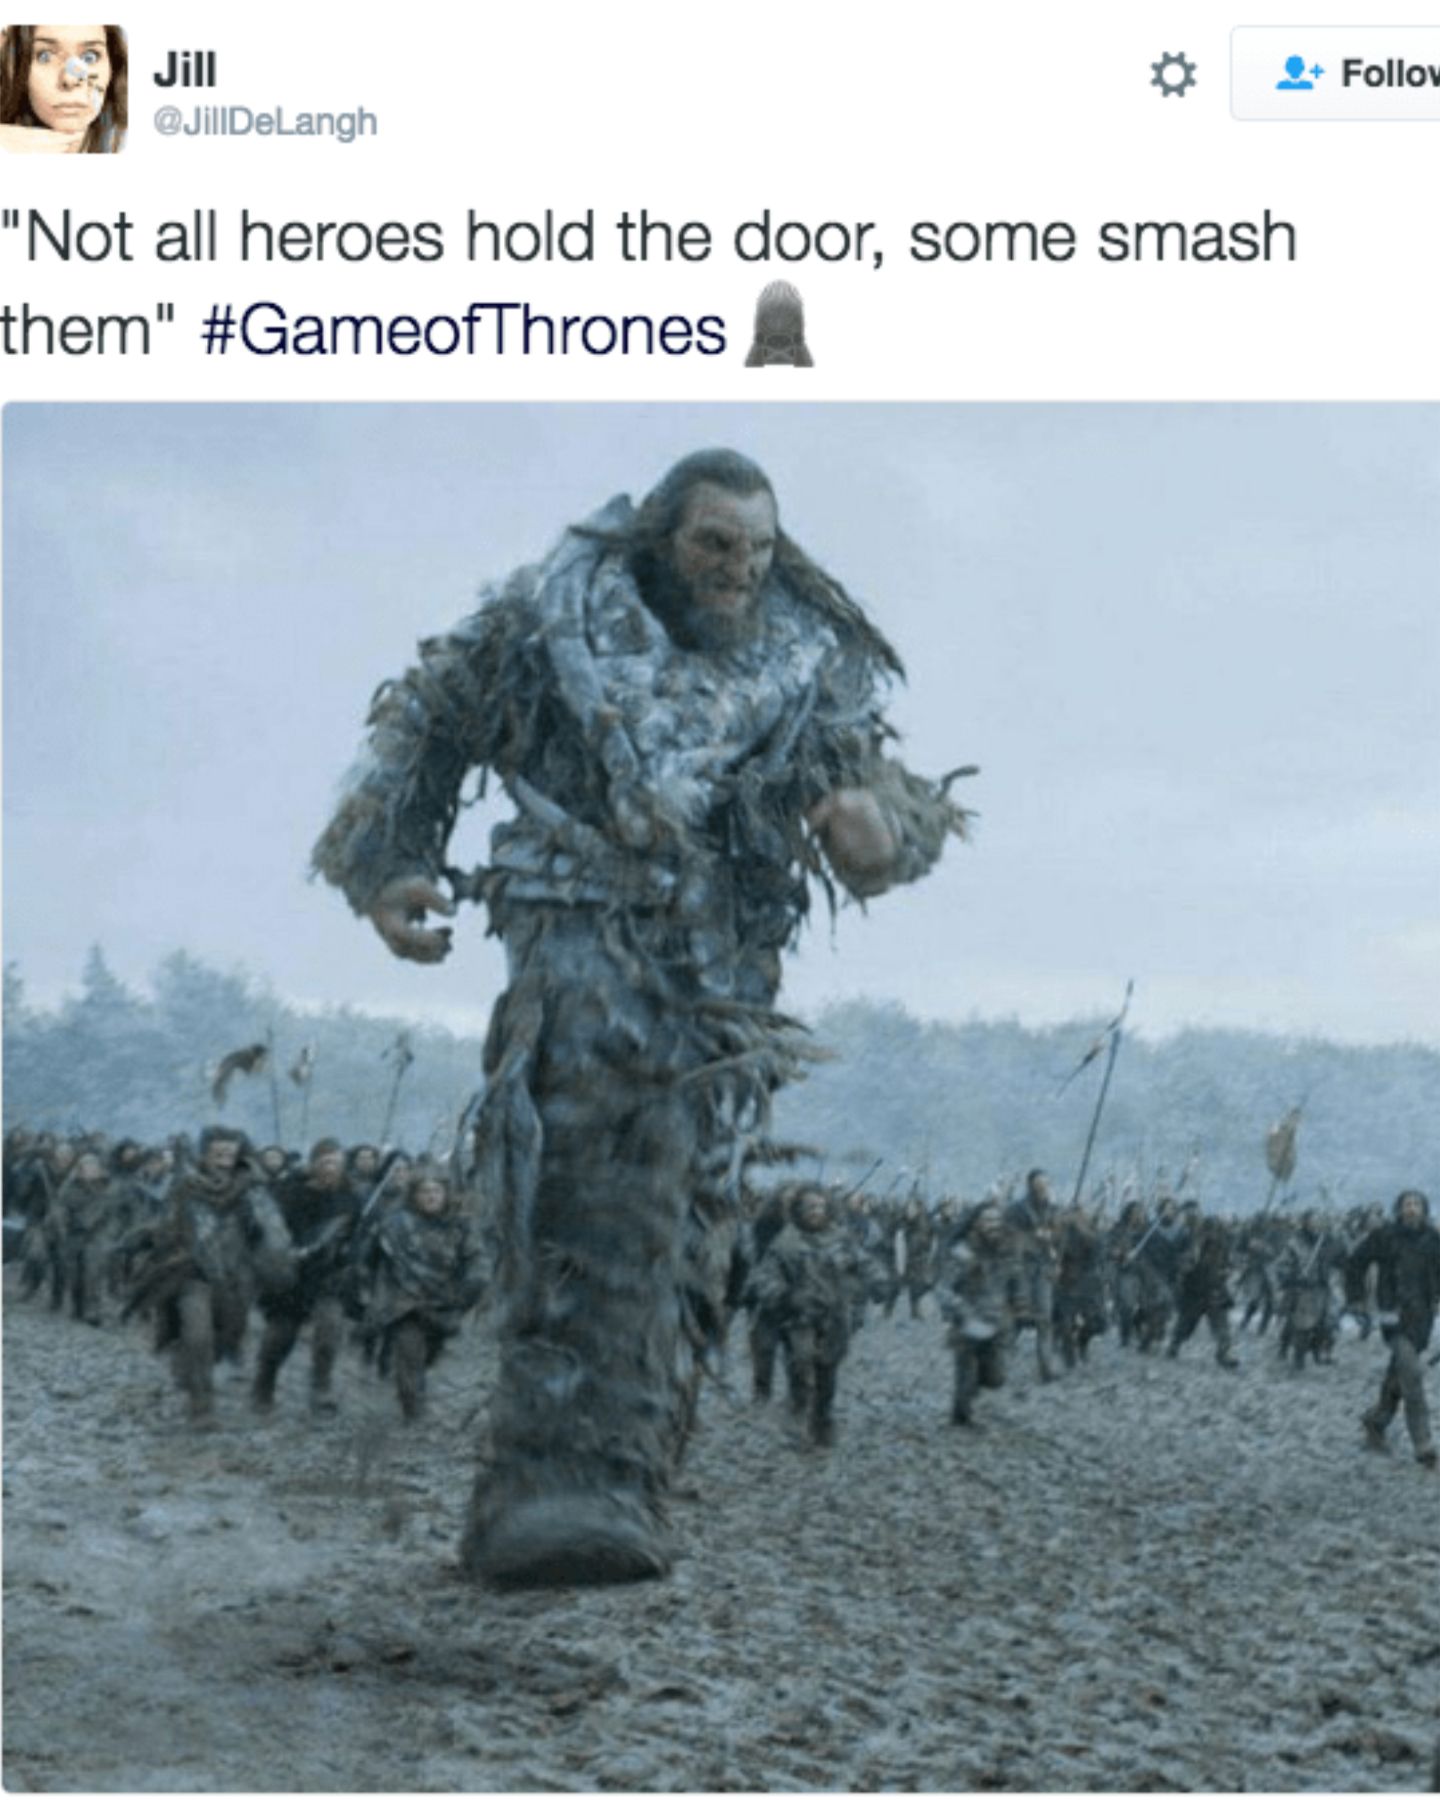 Meme about the giant from Game of Thrones. 